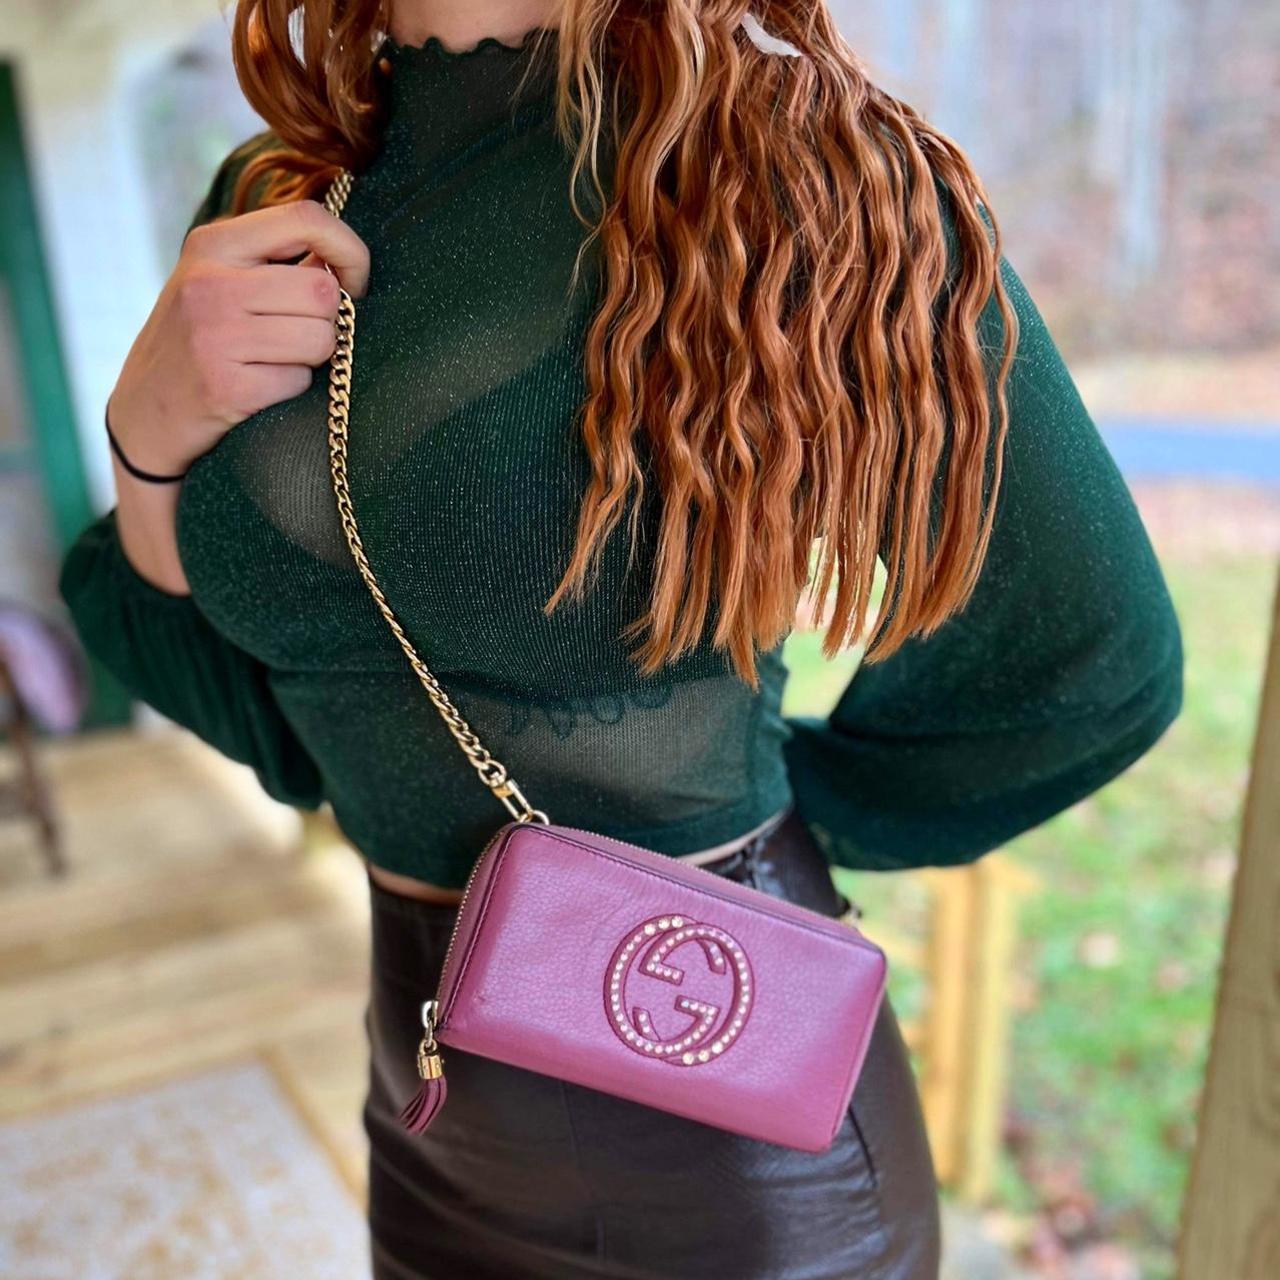 Gucci Women's Pink and Gold Bag